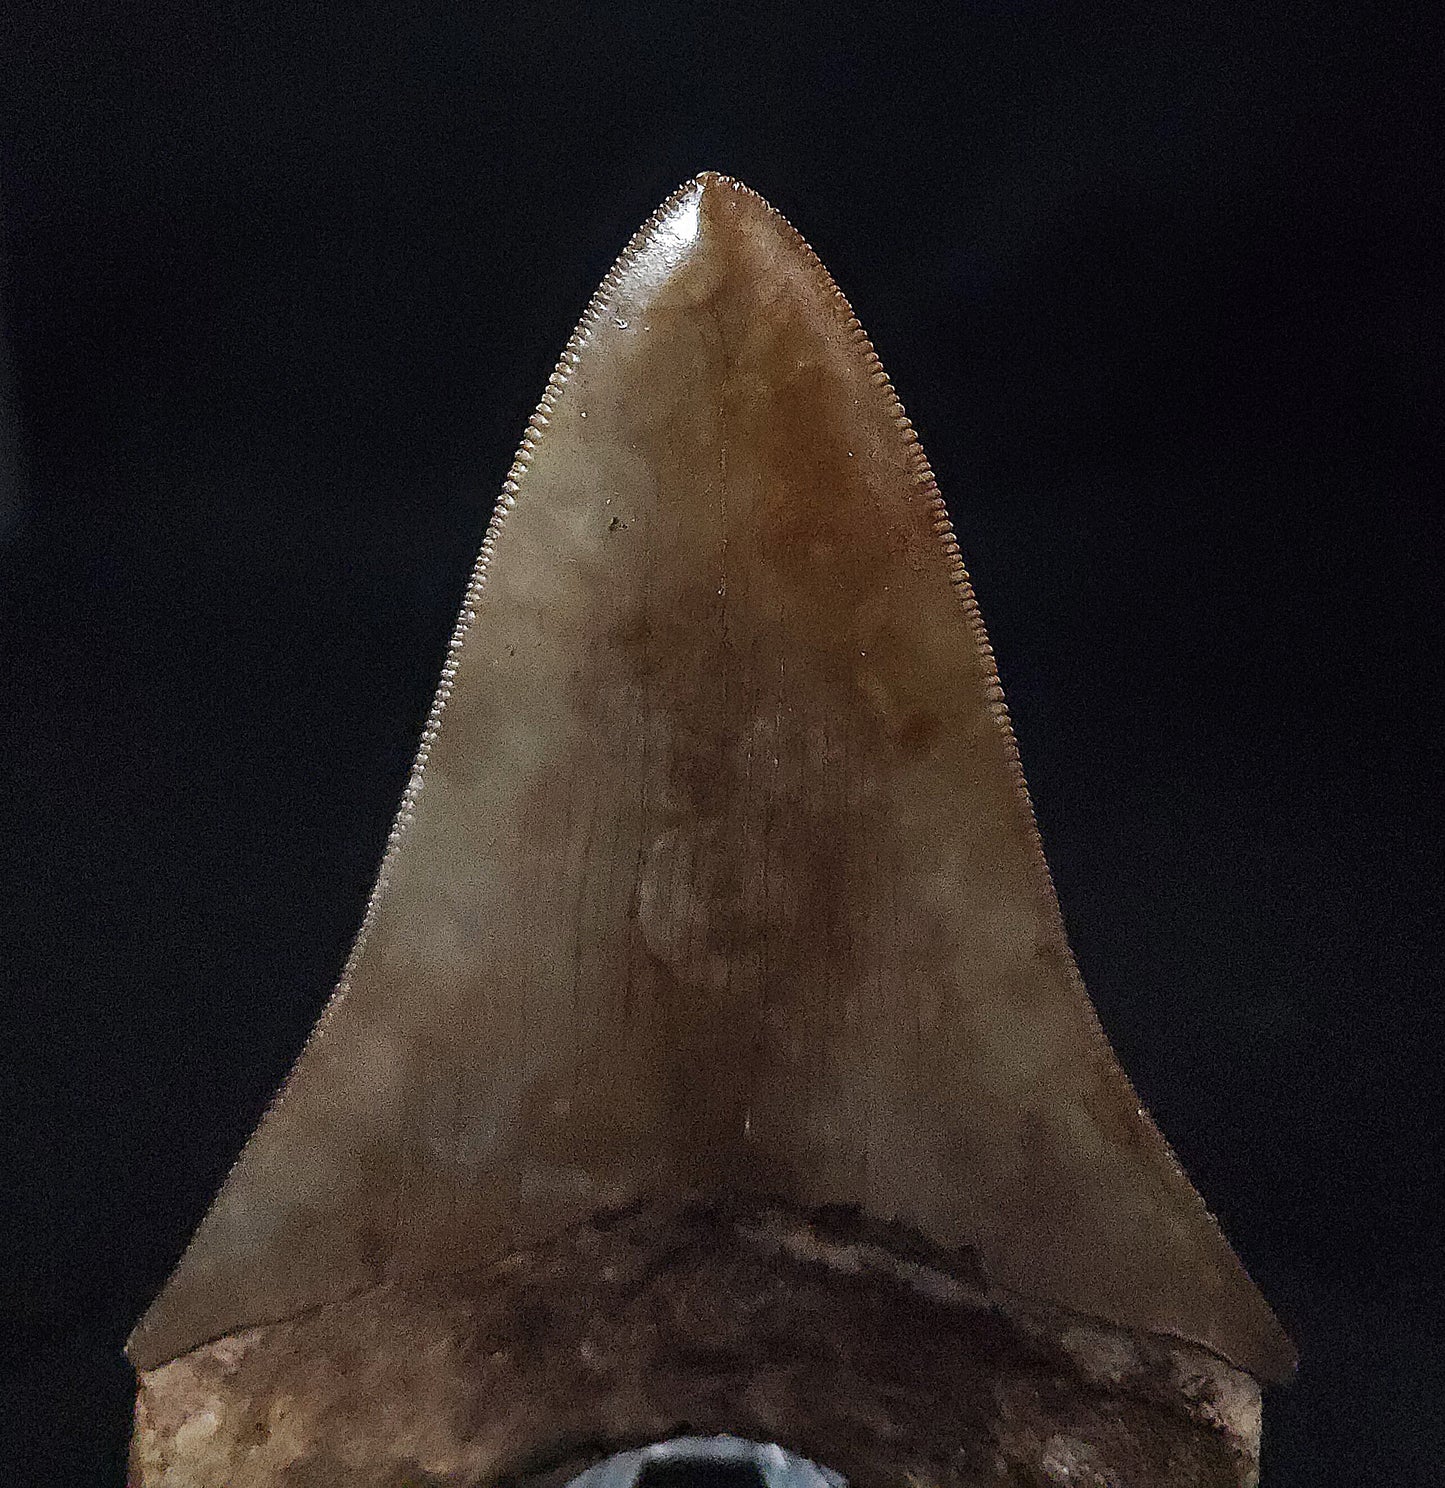 High Quality, 4.21" Fossil Megalodon Tooth - St. Mary's River